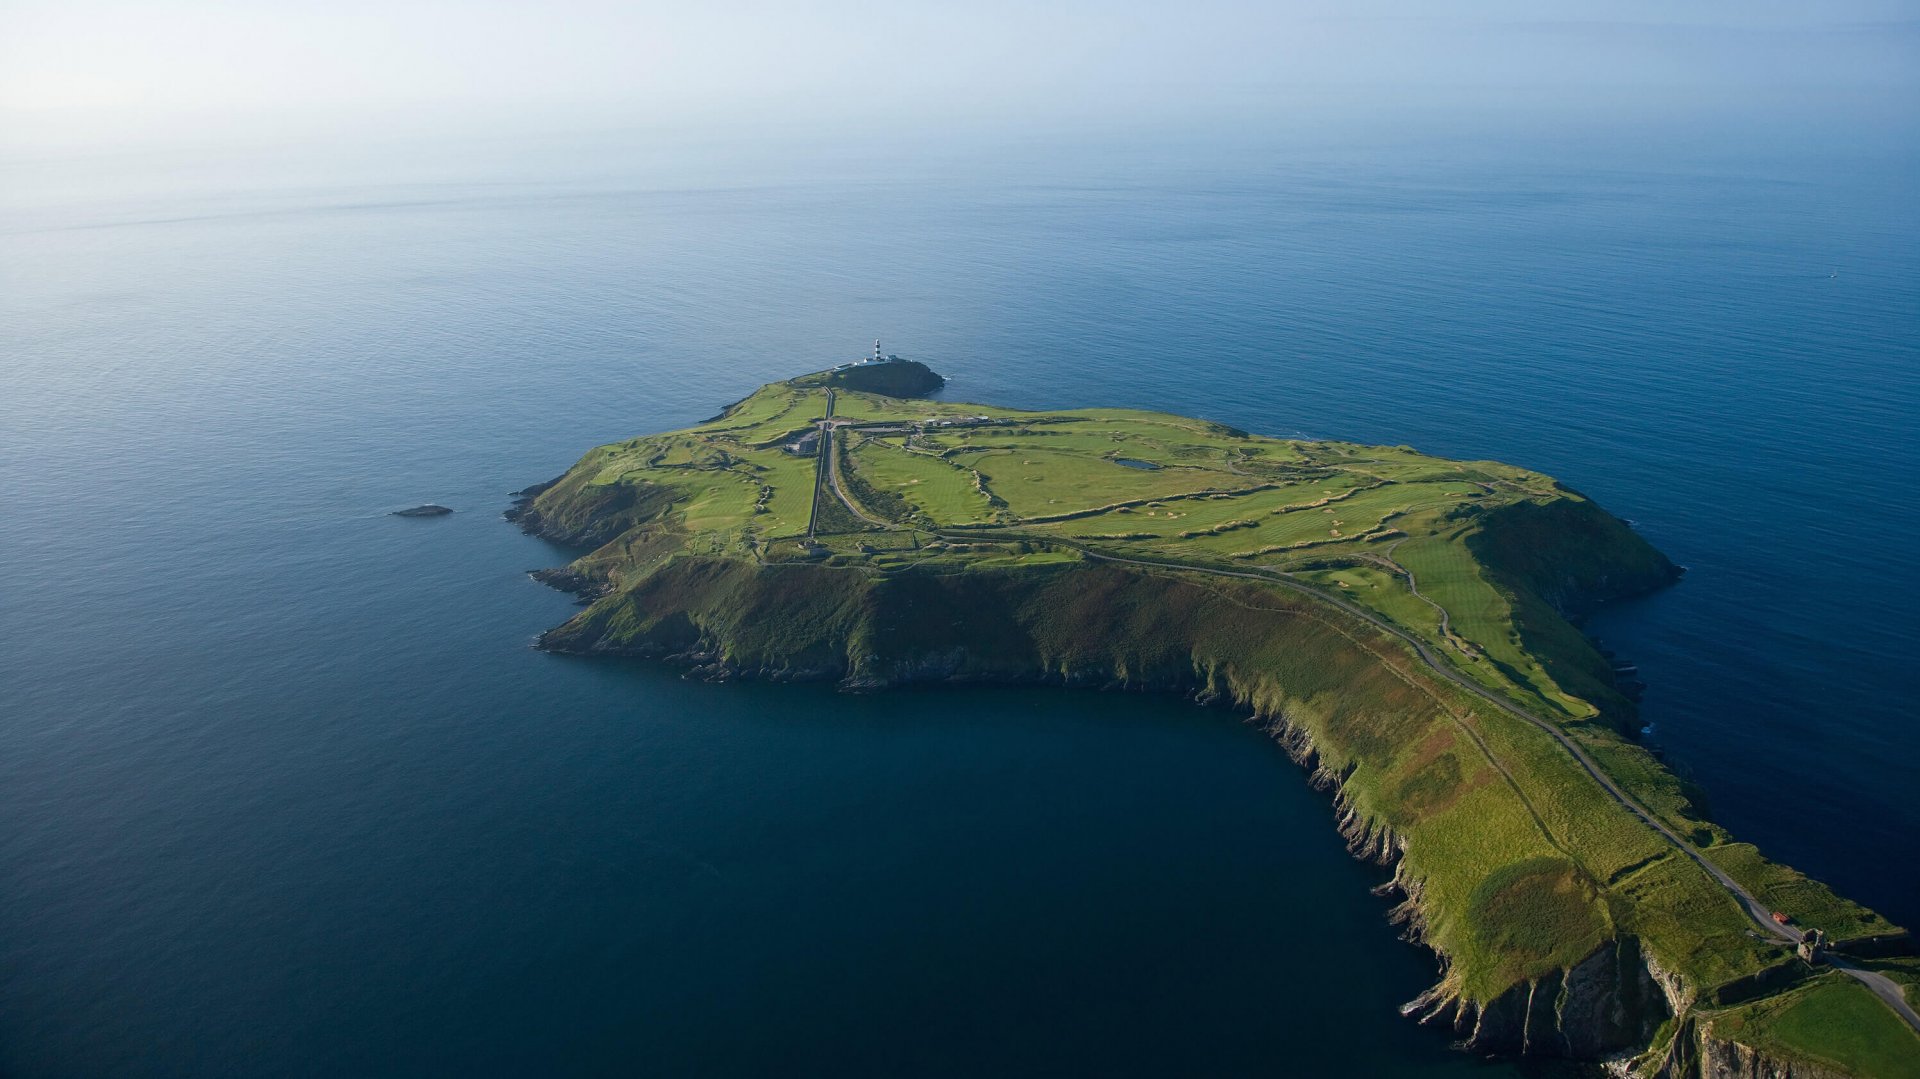 The Old Head of Kinsale, with lighthouse and golf course